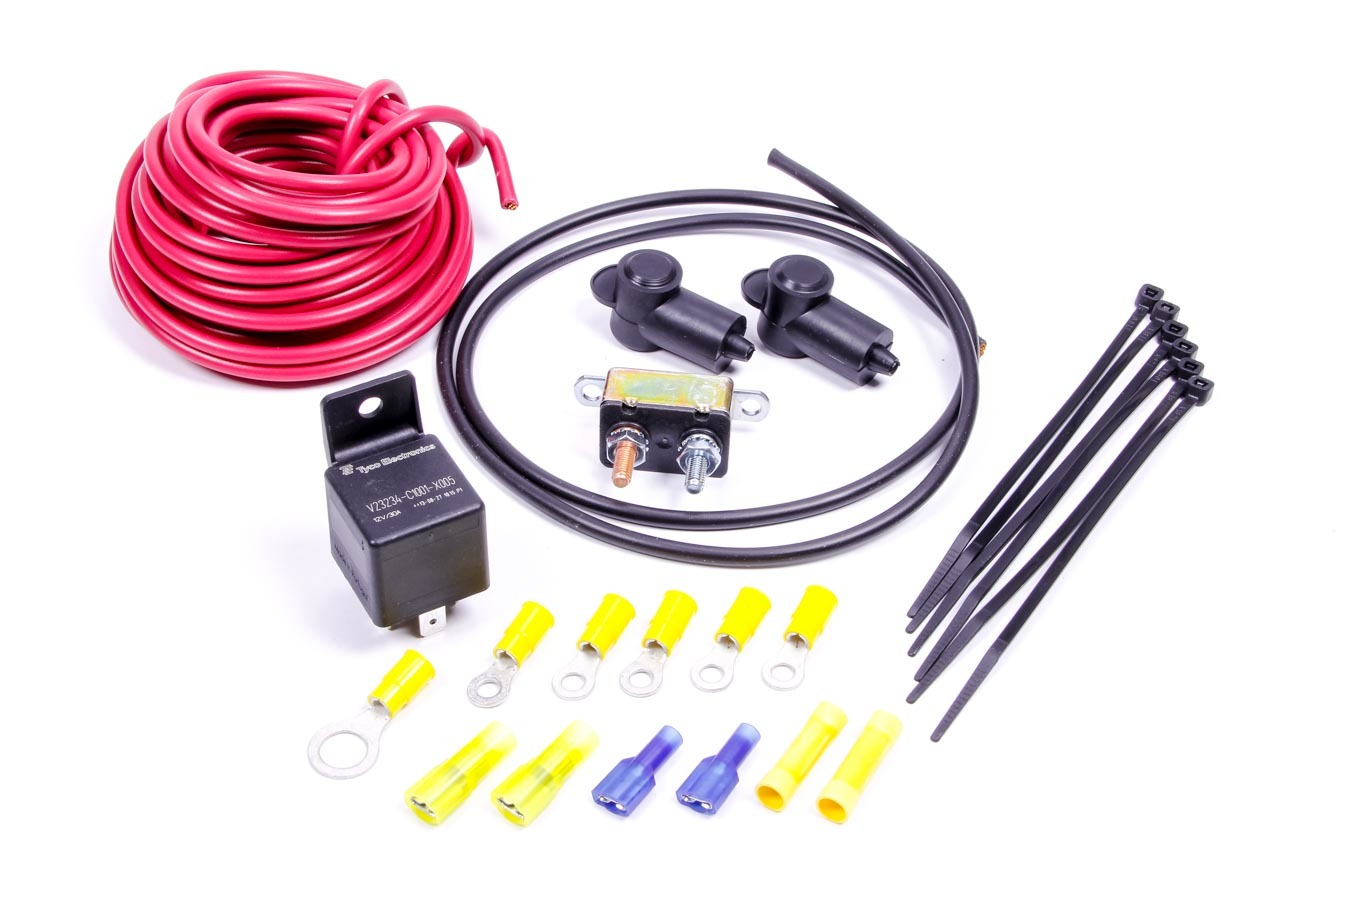 Aeromotive 16301 Fuel Pump Wiring Harness, 30 amp, Connectors / Relay / Wire / Cable Ties, Kit